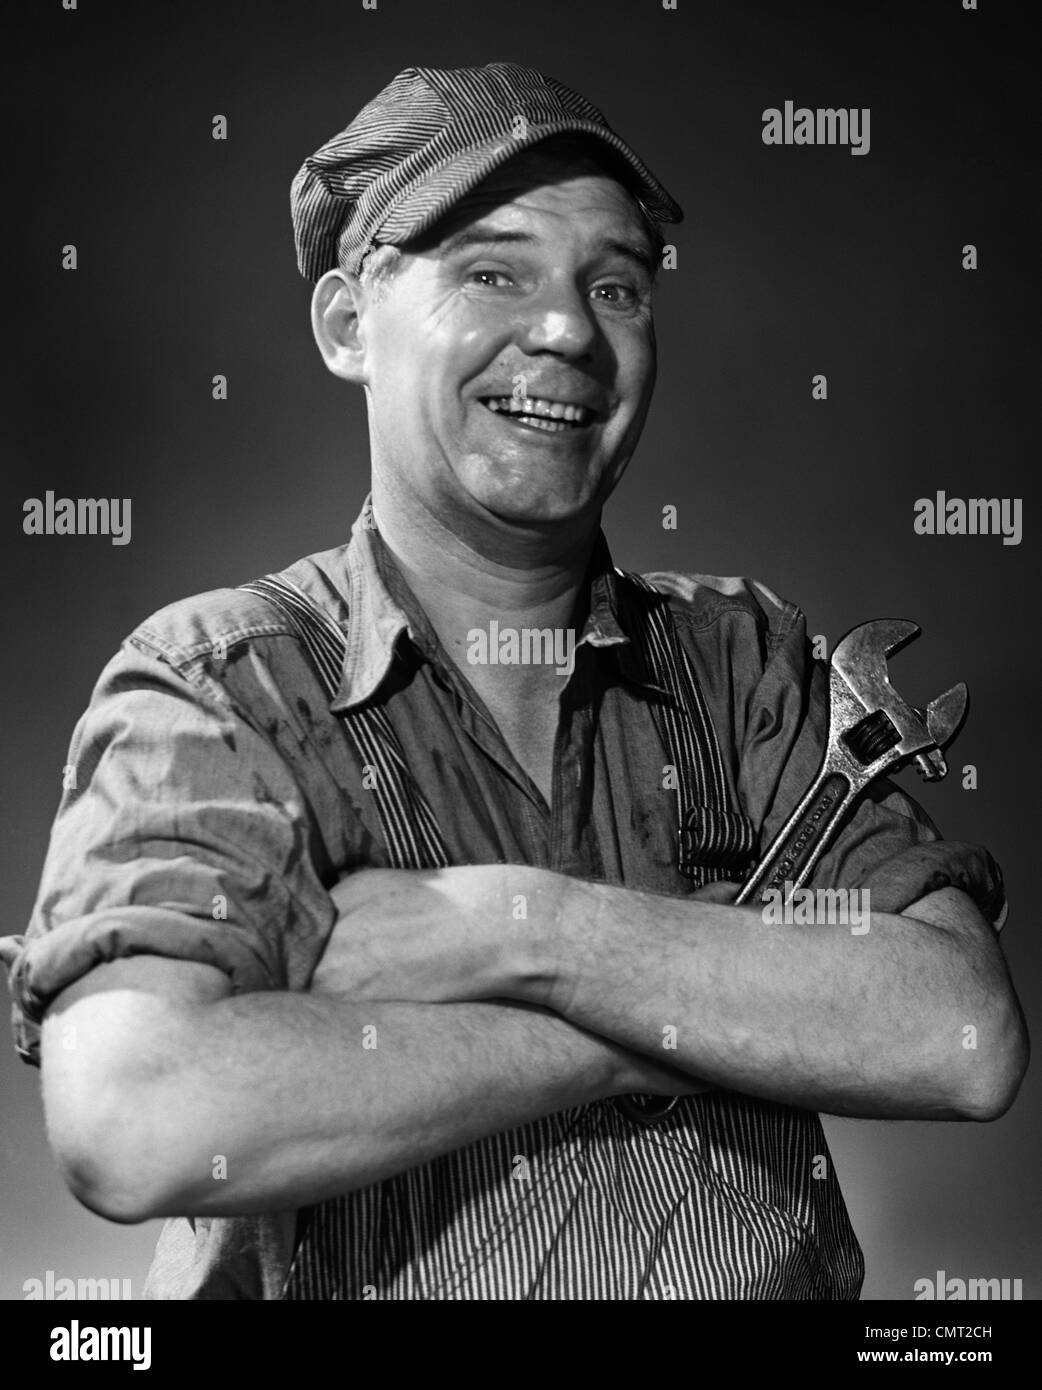 1950s 1960s SMILING PORTRAIT MAN IN STRIPED CAP & OVERALLS CROSSING ARMS HOLDING MONKEY WRENCH LOOKING AT CAMERA Stock Photo